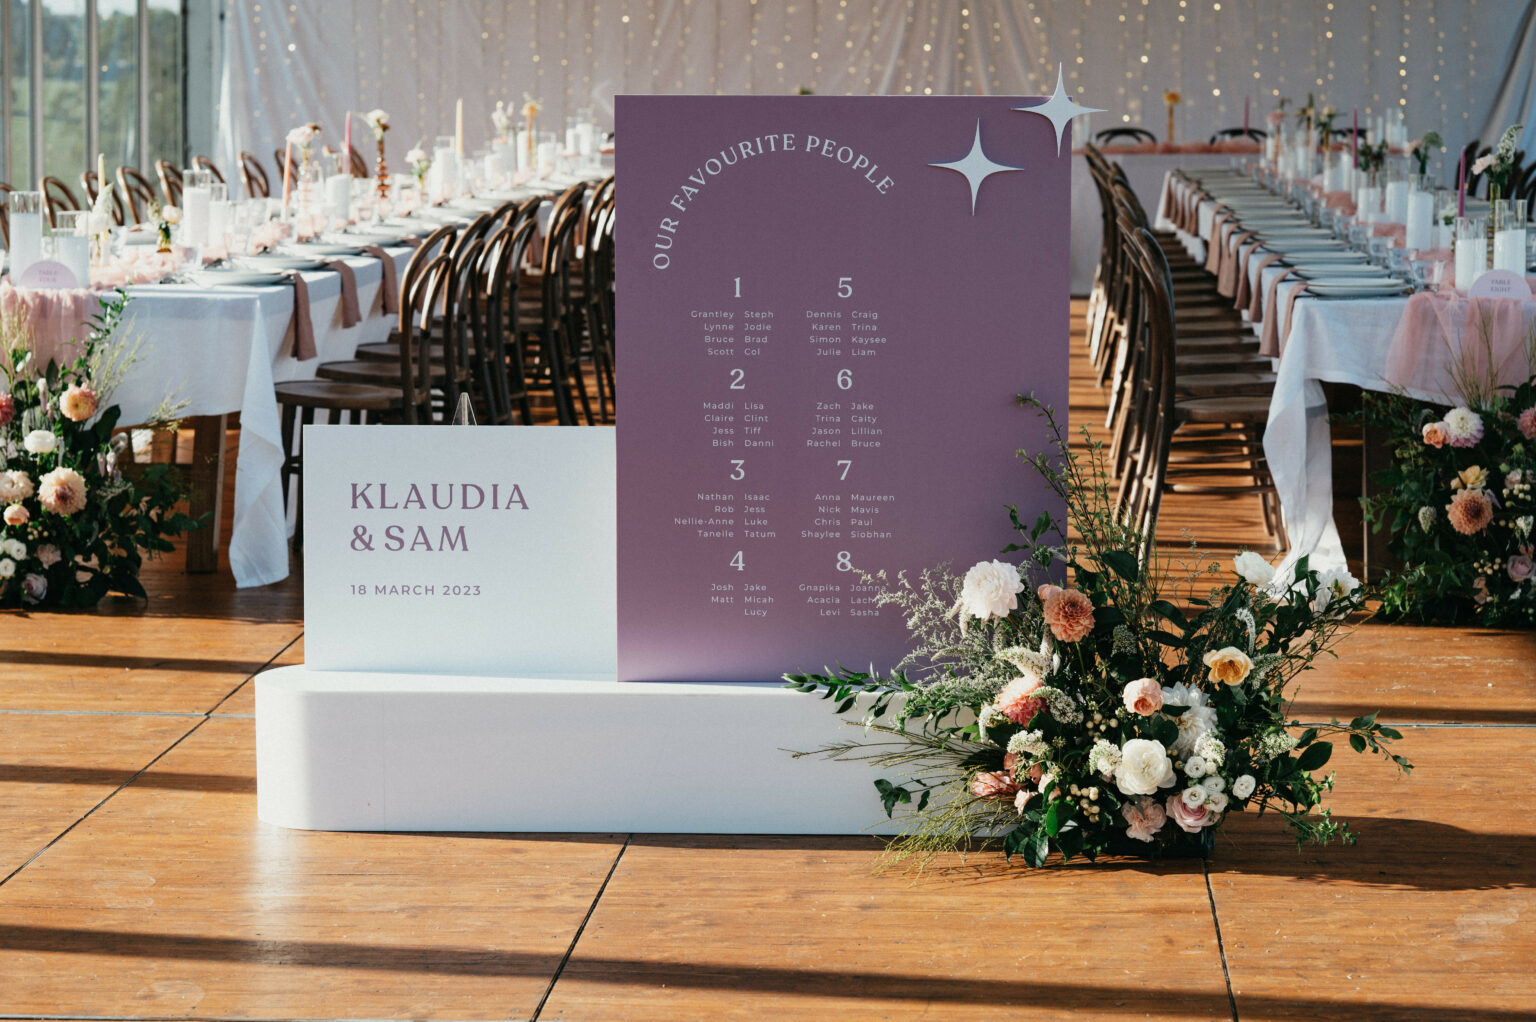 White welcome sign and purple seating chart at a wedding